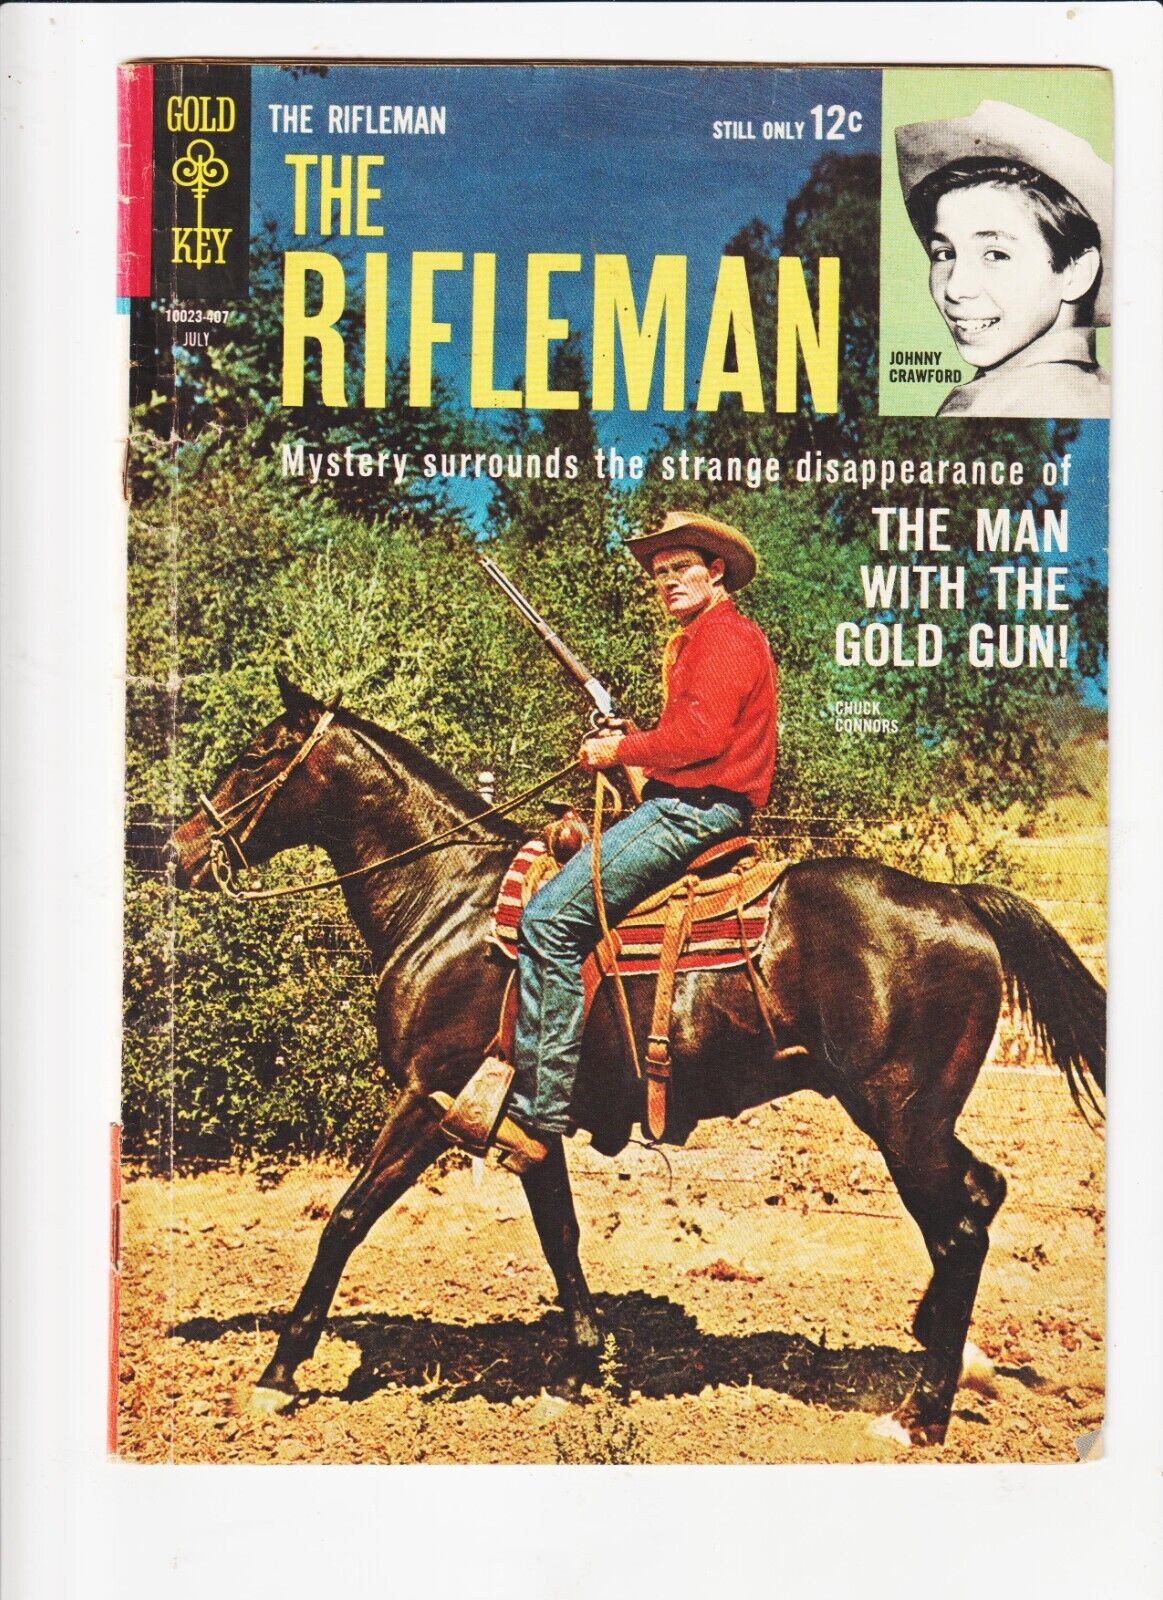 THE RIFLEMAN COMICS /19 CHUCK CONNERS, WESTERN  PHOTO COVER/ GOLDEN RIFLE